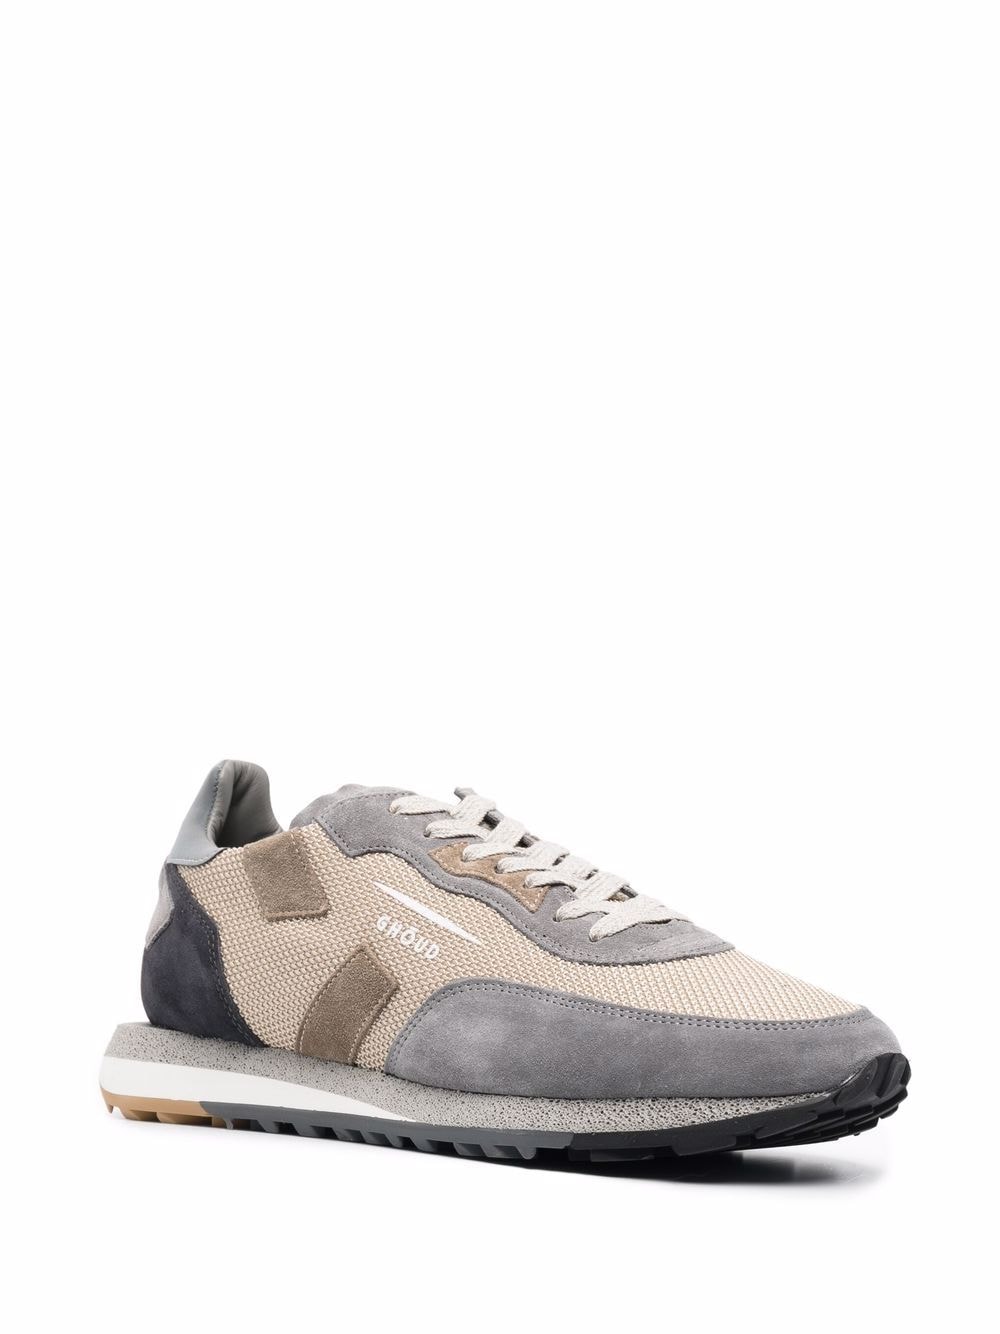 Shop GHOUD Rush low-top sneakers with Express Delivery - FARFETCH